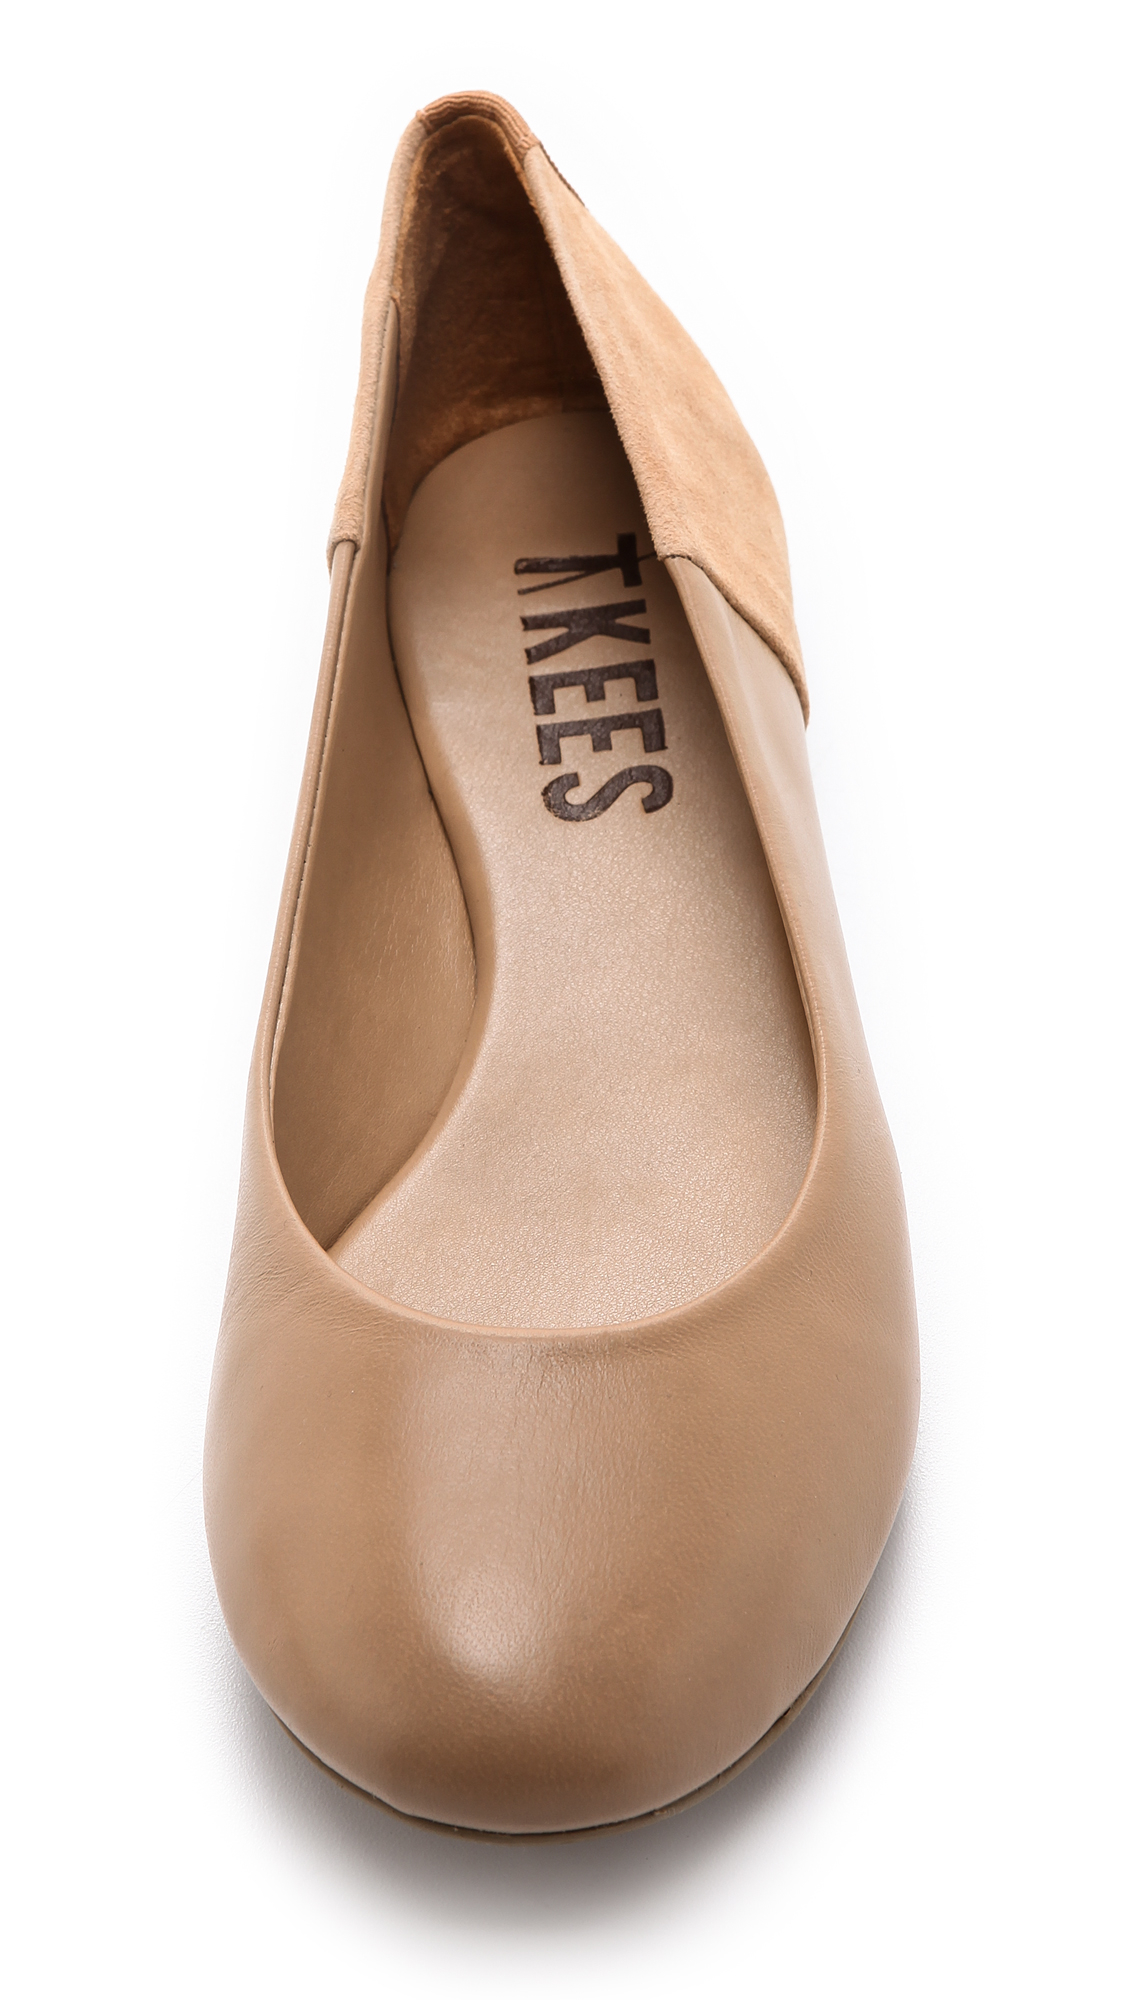 TKEES Leather Raleigh Ballet Flats Smoky Silver in Natural - Lyst